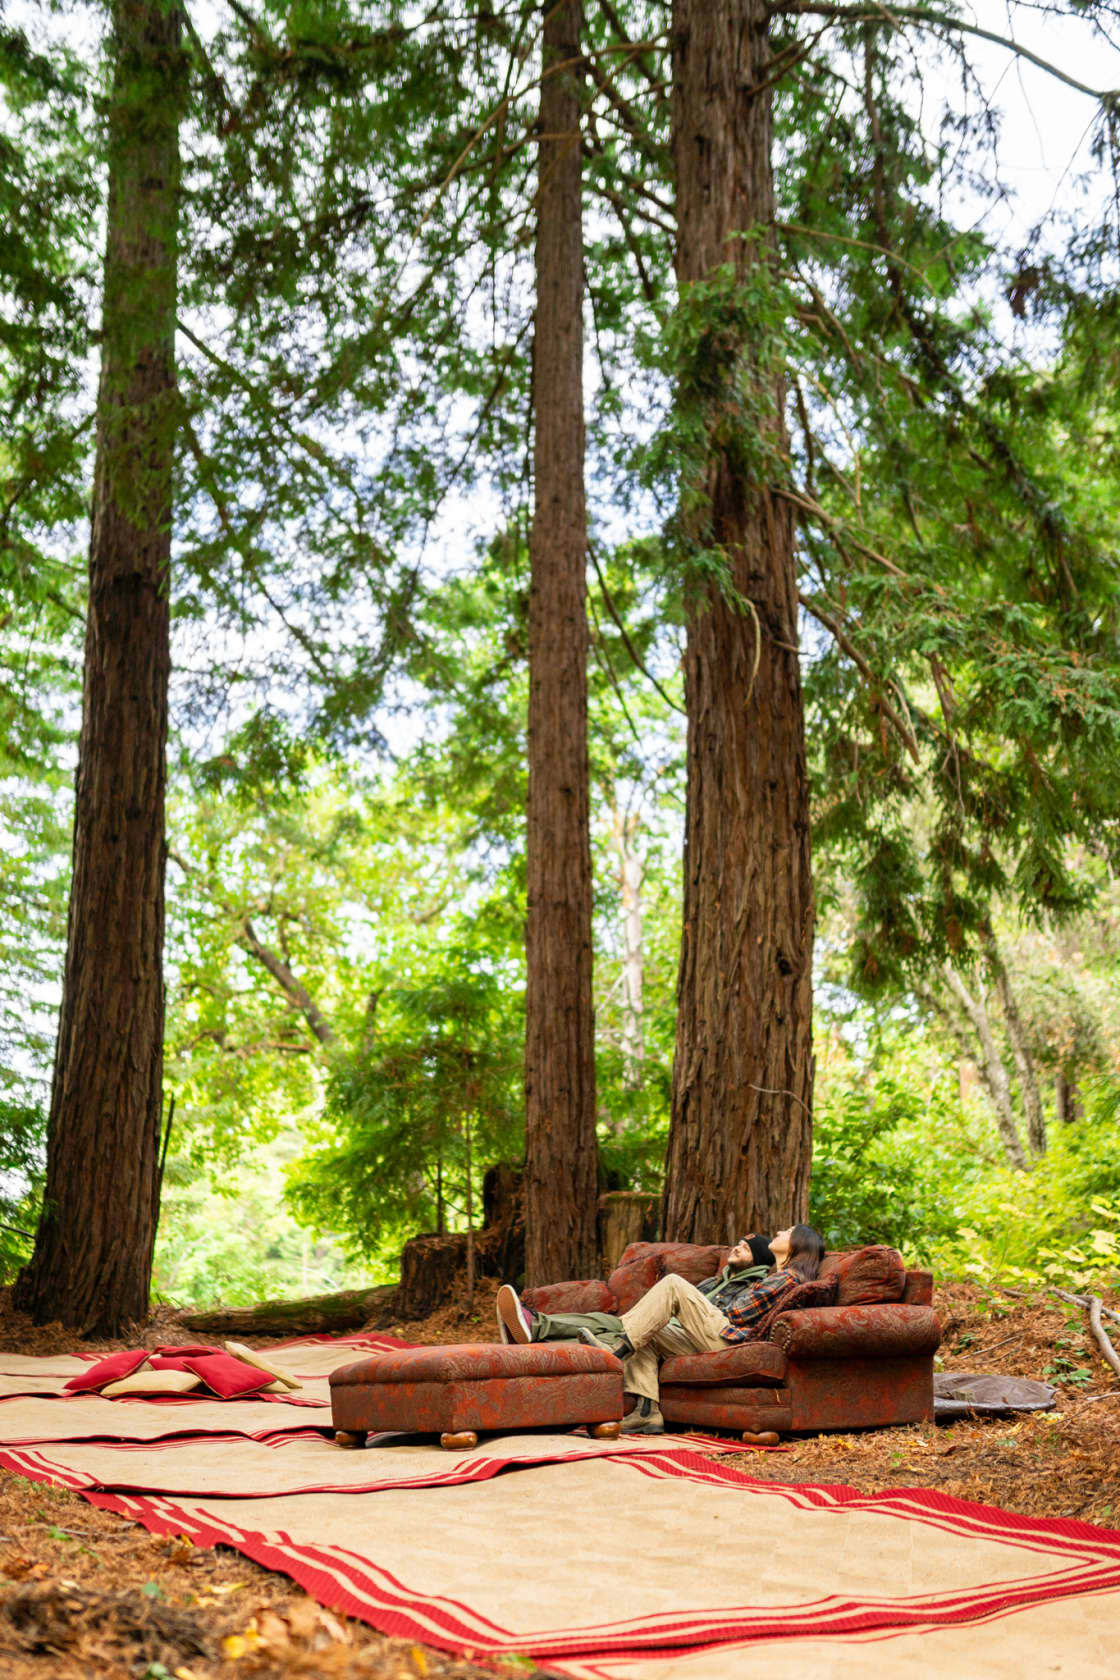 Couch nestled in a redwood grove